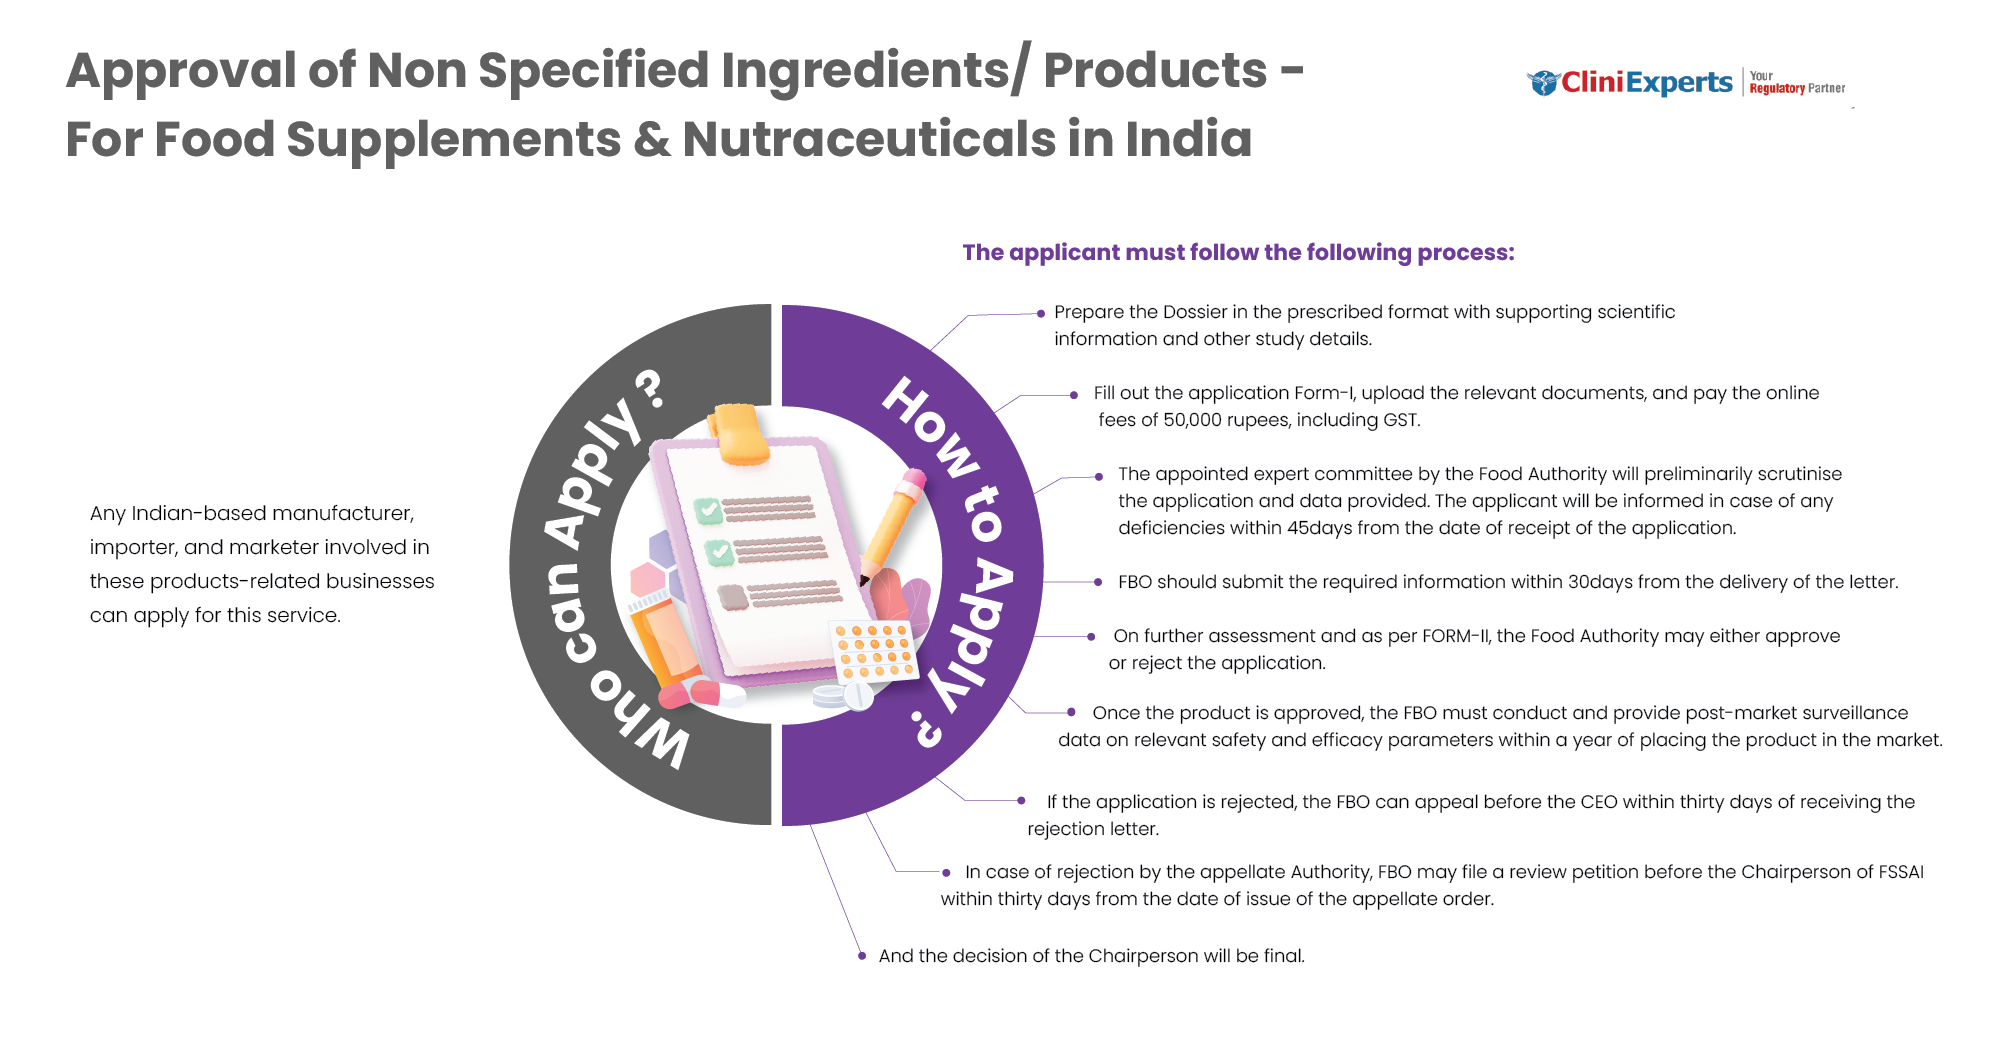 FSSAI Approval for non-specified Food Supplements & Nutraceuticals Regulation